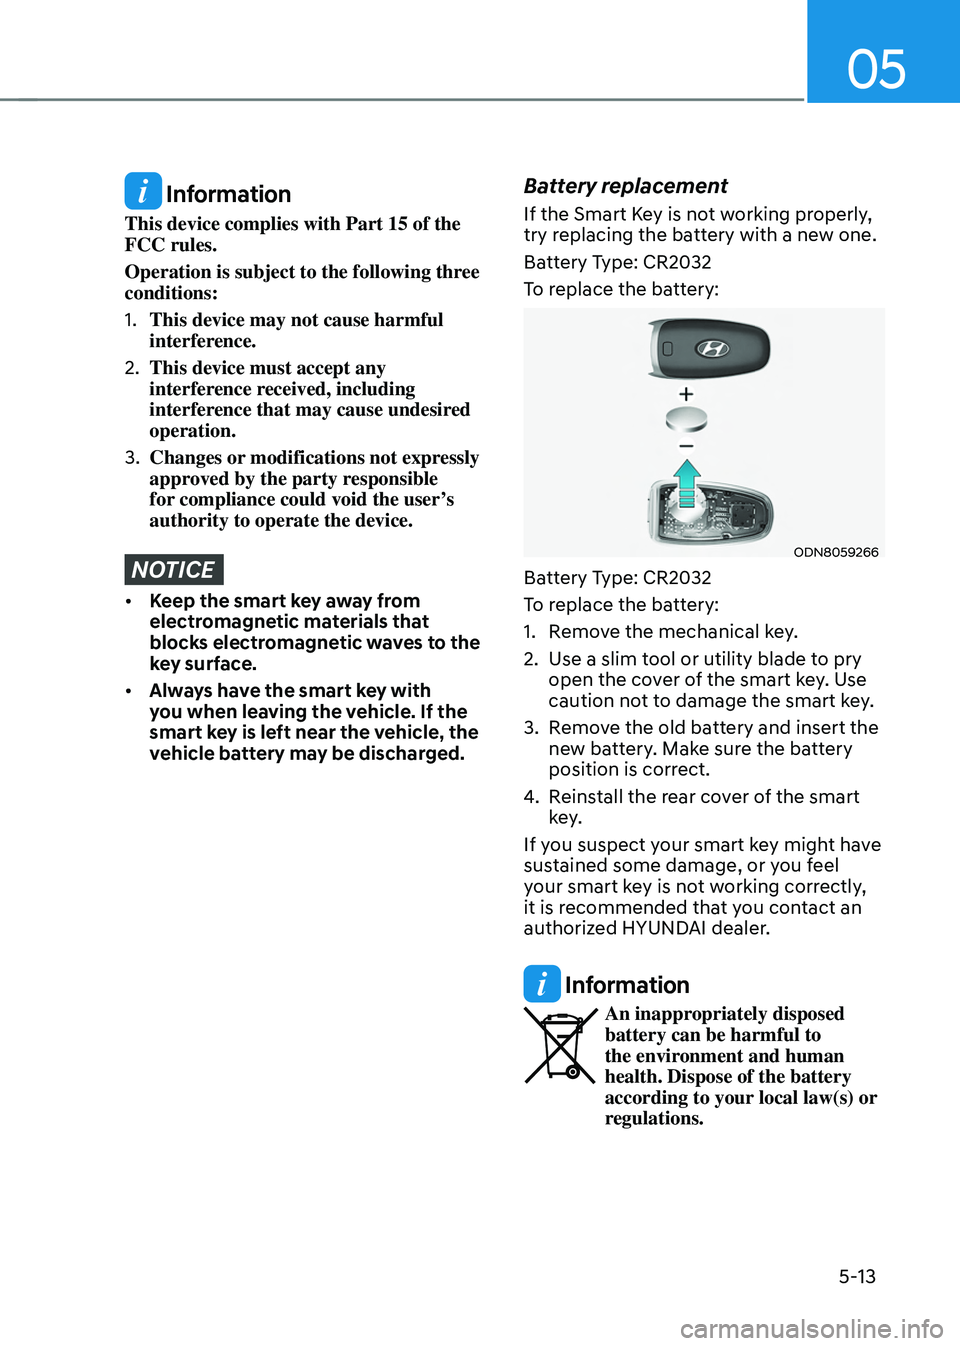 HYUNDAI TUCSON 2022  Owners Manual 05
5-13
 Information
This device complies with Part 15 of the 
FCC rules.
Operation is subject to the following three 
conditions:
1. This device may not cause harmful 
interference.
2. This device mu